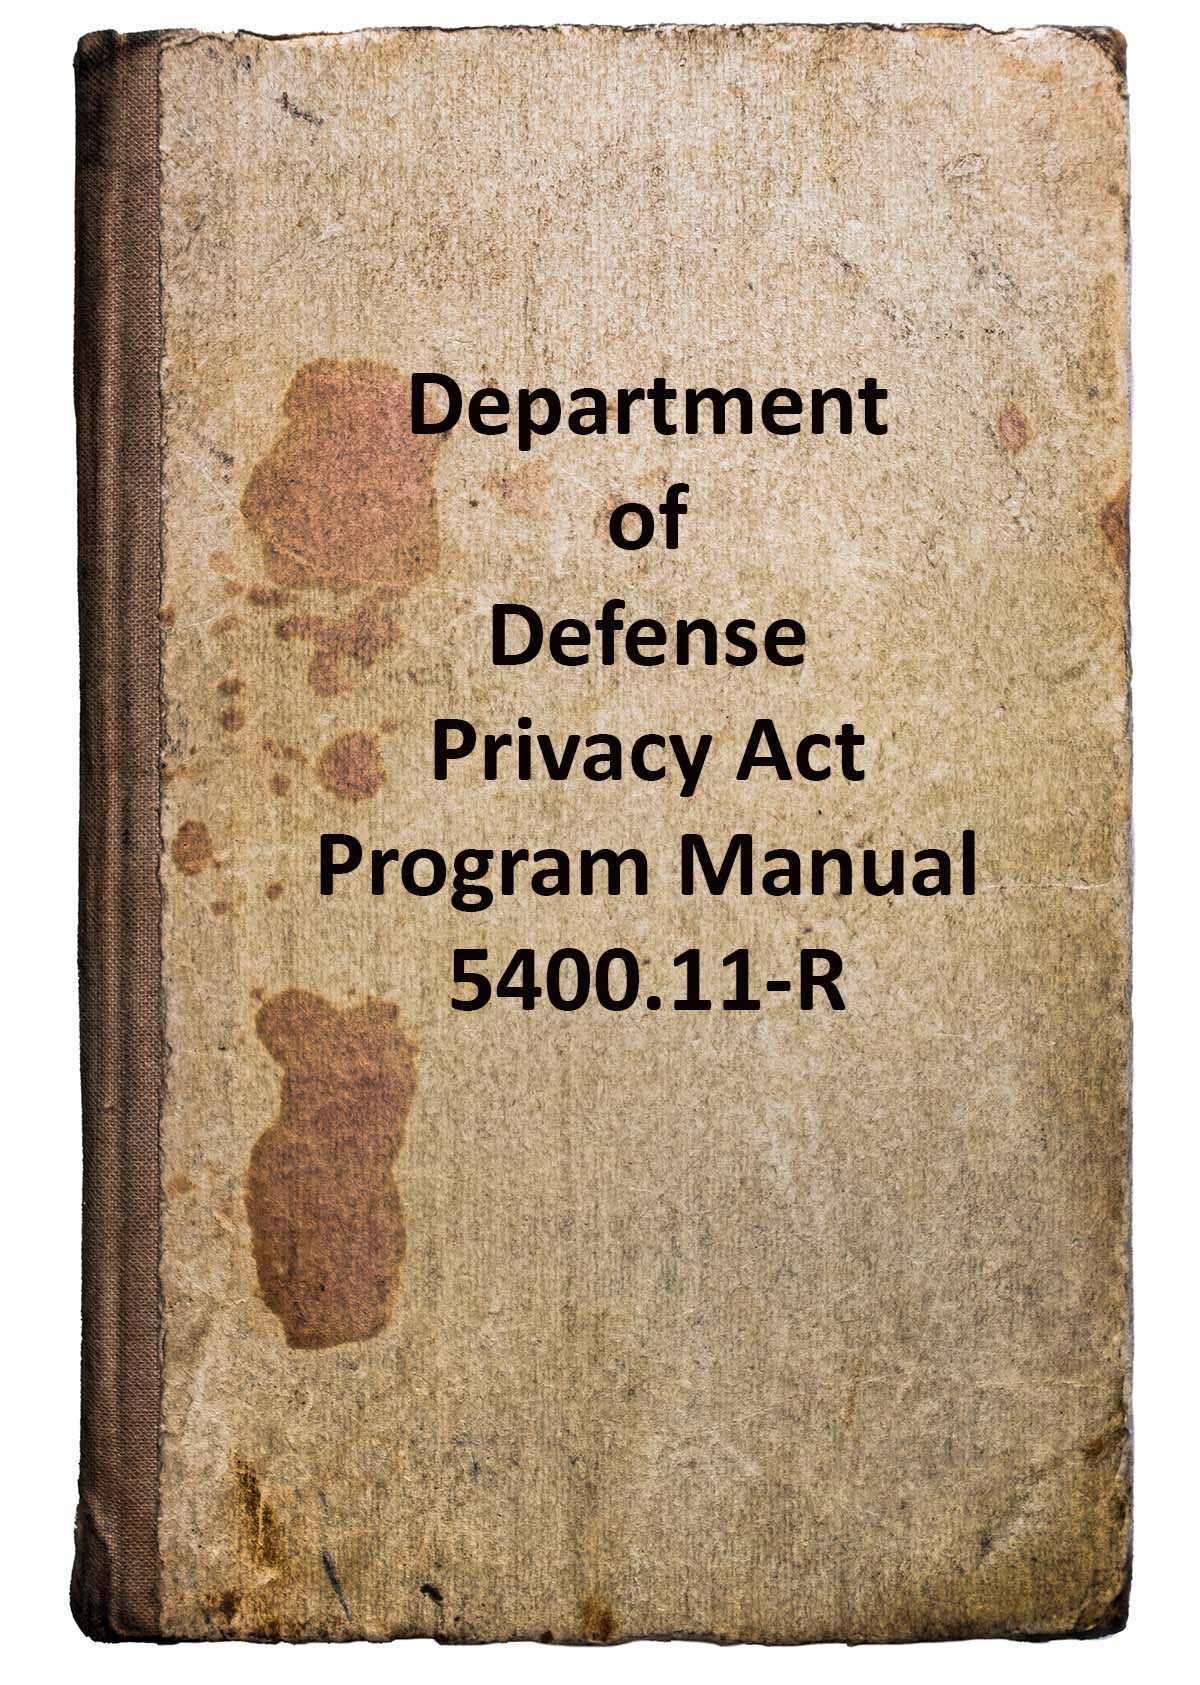 This is a picture of a book that links to the Department of Defense Privacy Act Program Act Manual